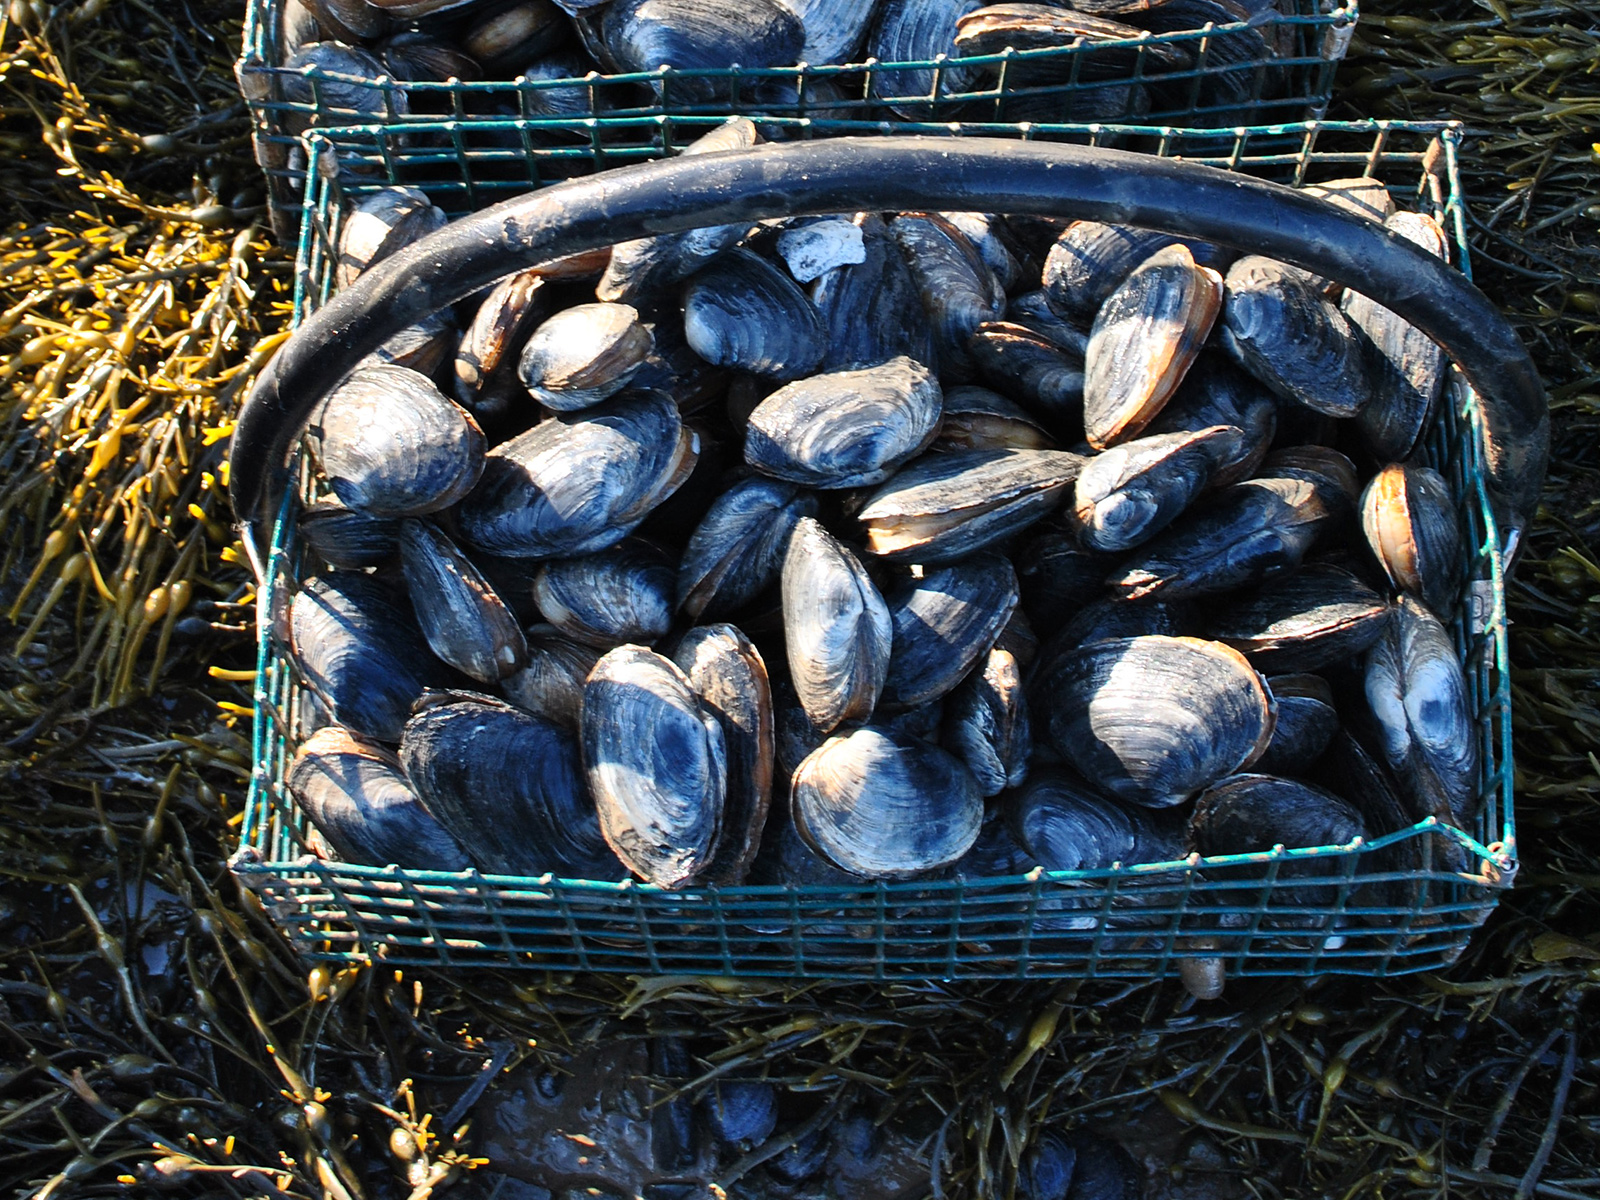 a basket full of shellfish, surrounded by seaweed.